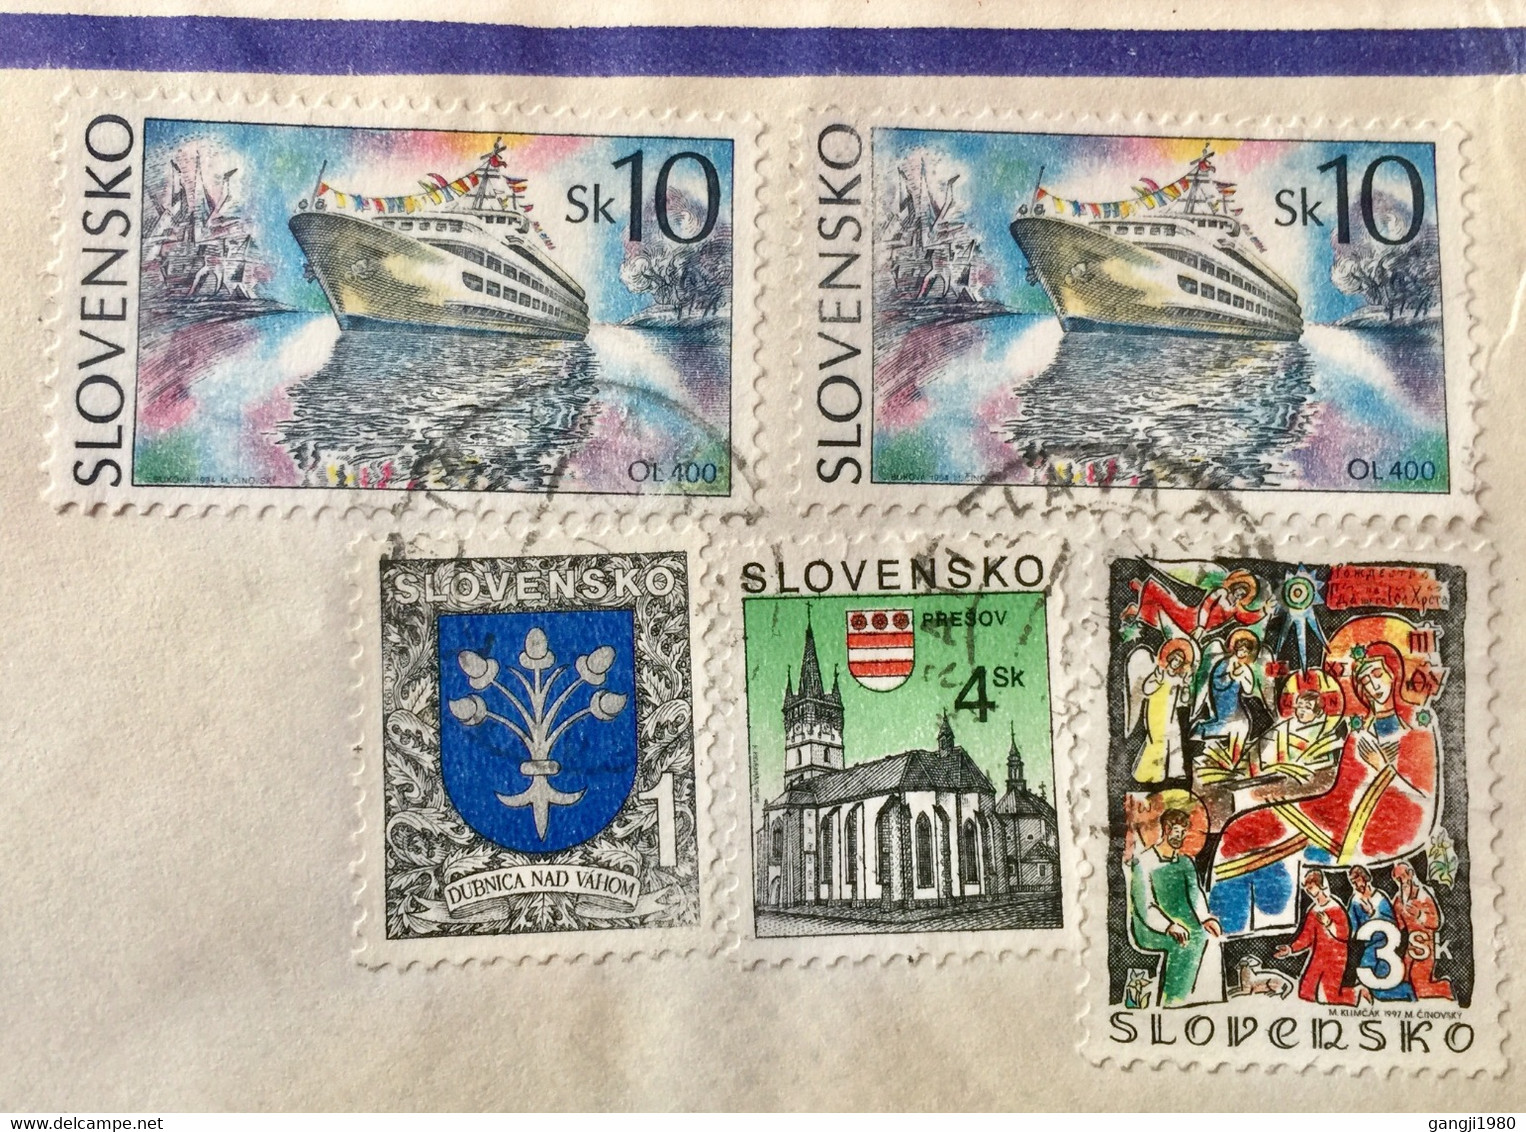 SLOVAKIA 2005, USED AIRMAIL COVER TO INDIA ,5 STAMPS 38SK RATE !SHIP, PRESOV,BUILDING,CHURCH,FAIRYTALES,ART ,PAINTING - Briefe U. Dokumente